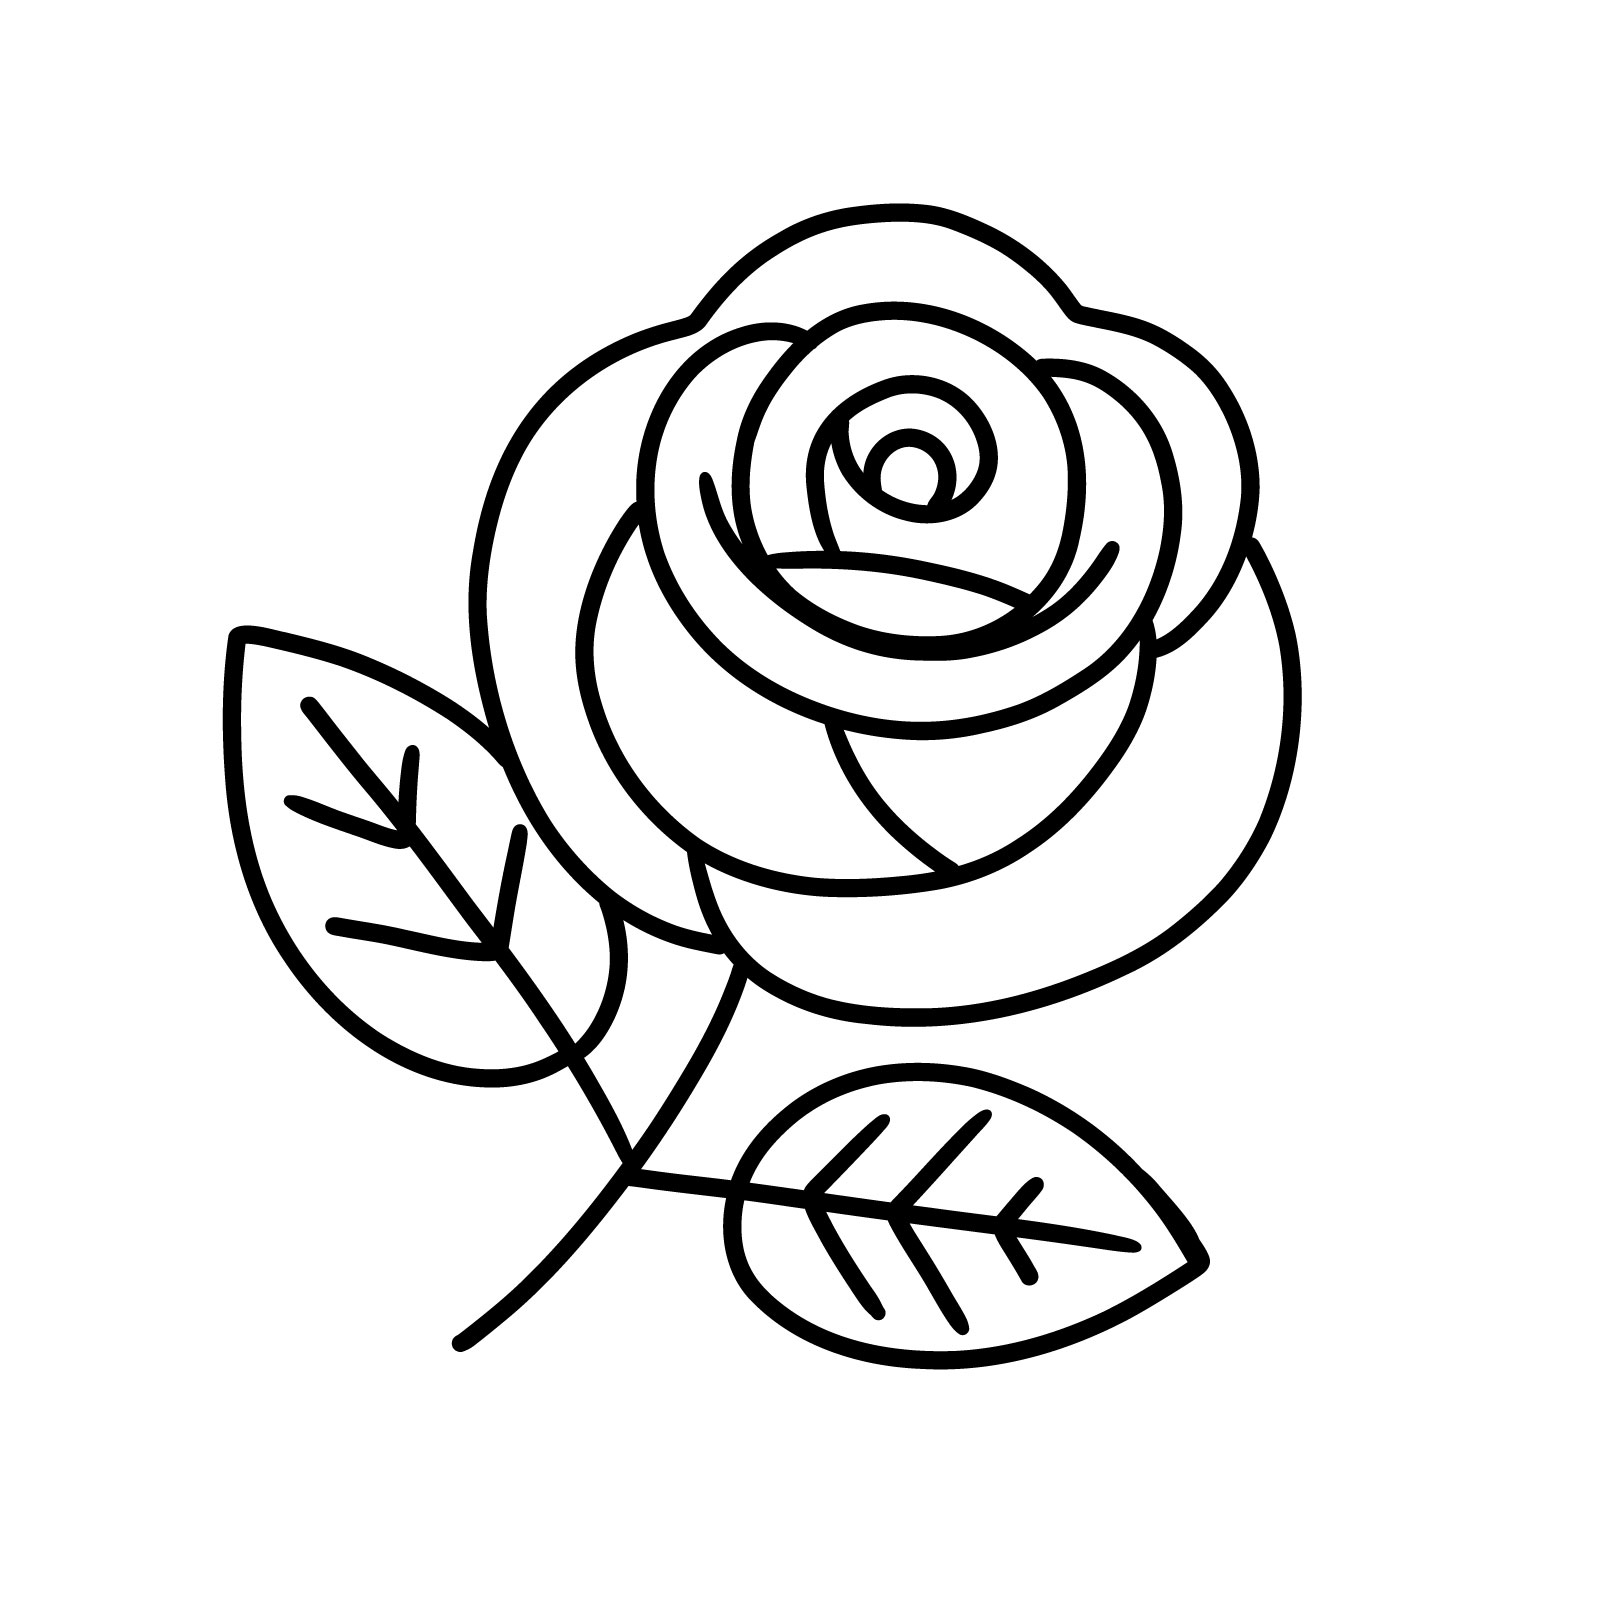 how to draw cute rose flower drawing ||... - EASY Drawing ART | Facebook